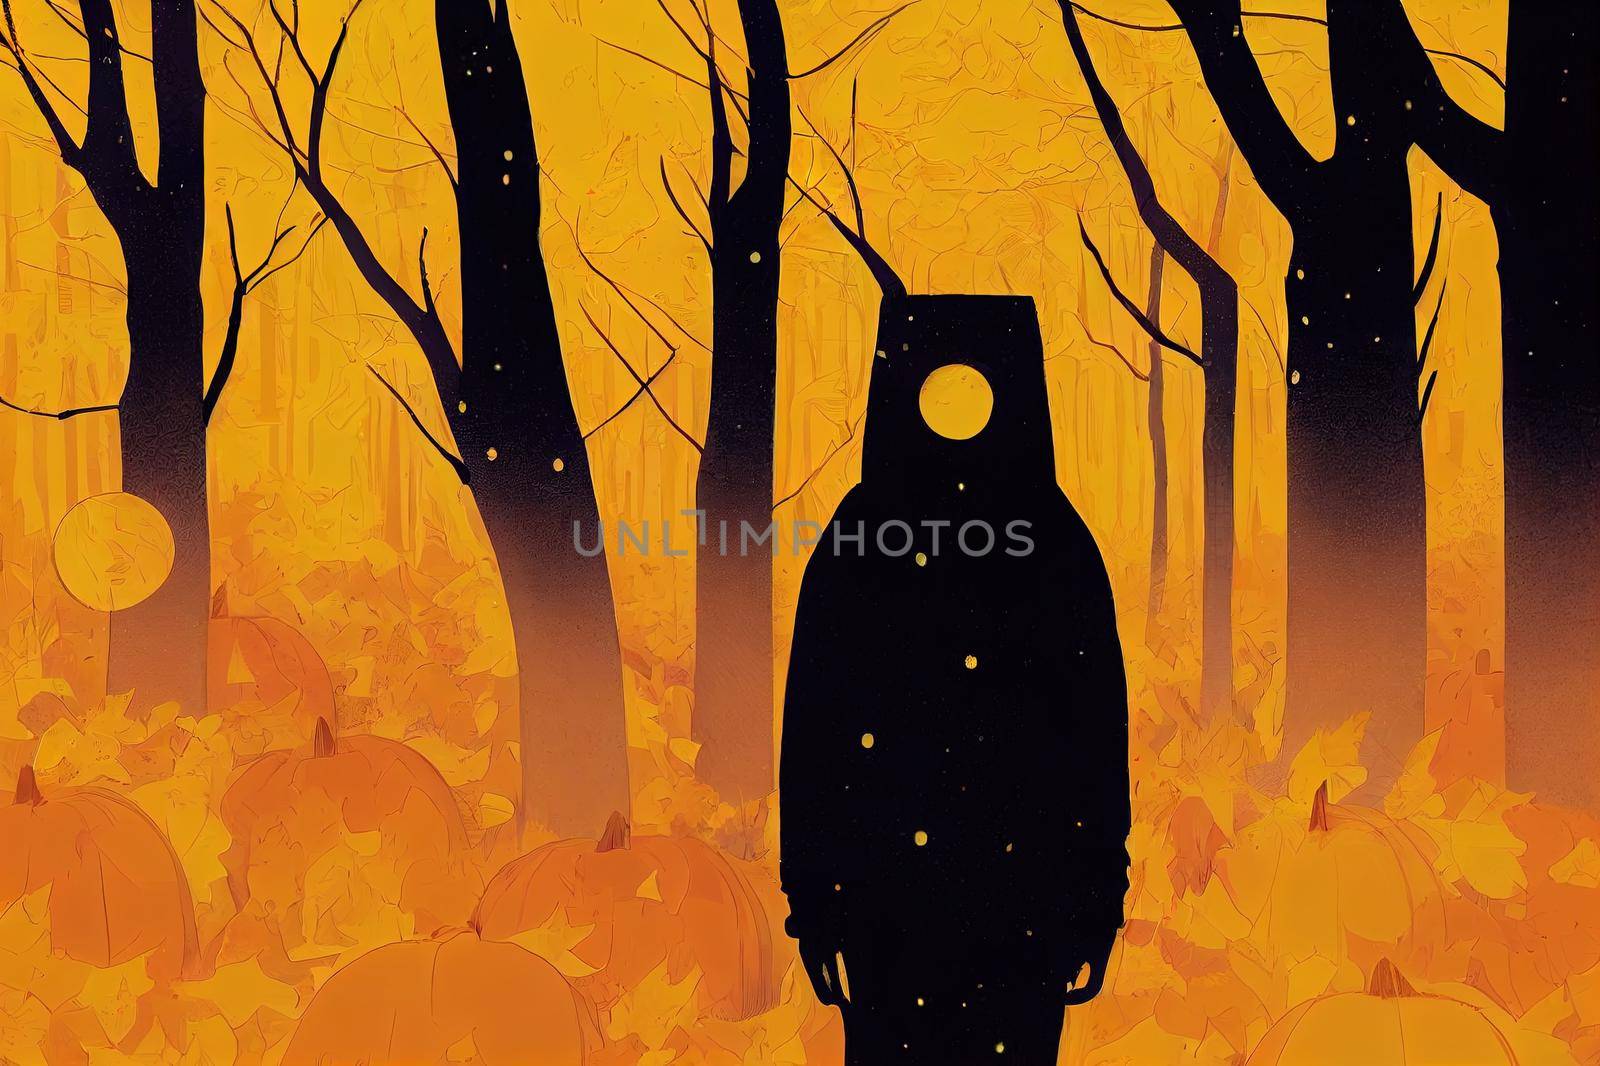 The astronaut in the middle of the autumn forest High quality 2d illustration. by 2ragon